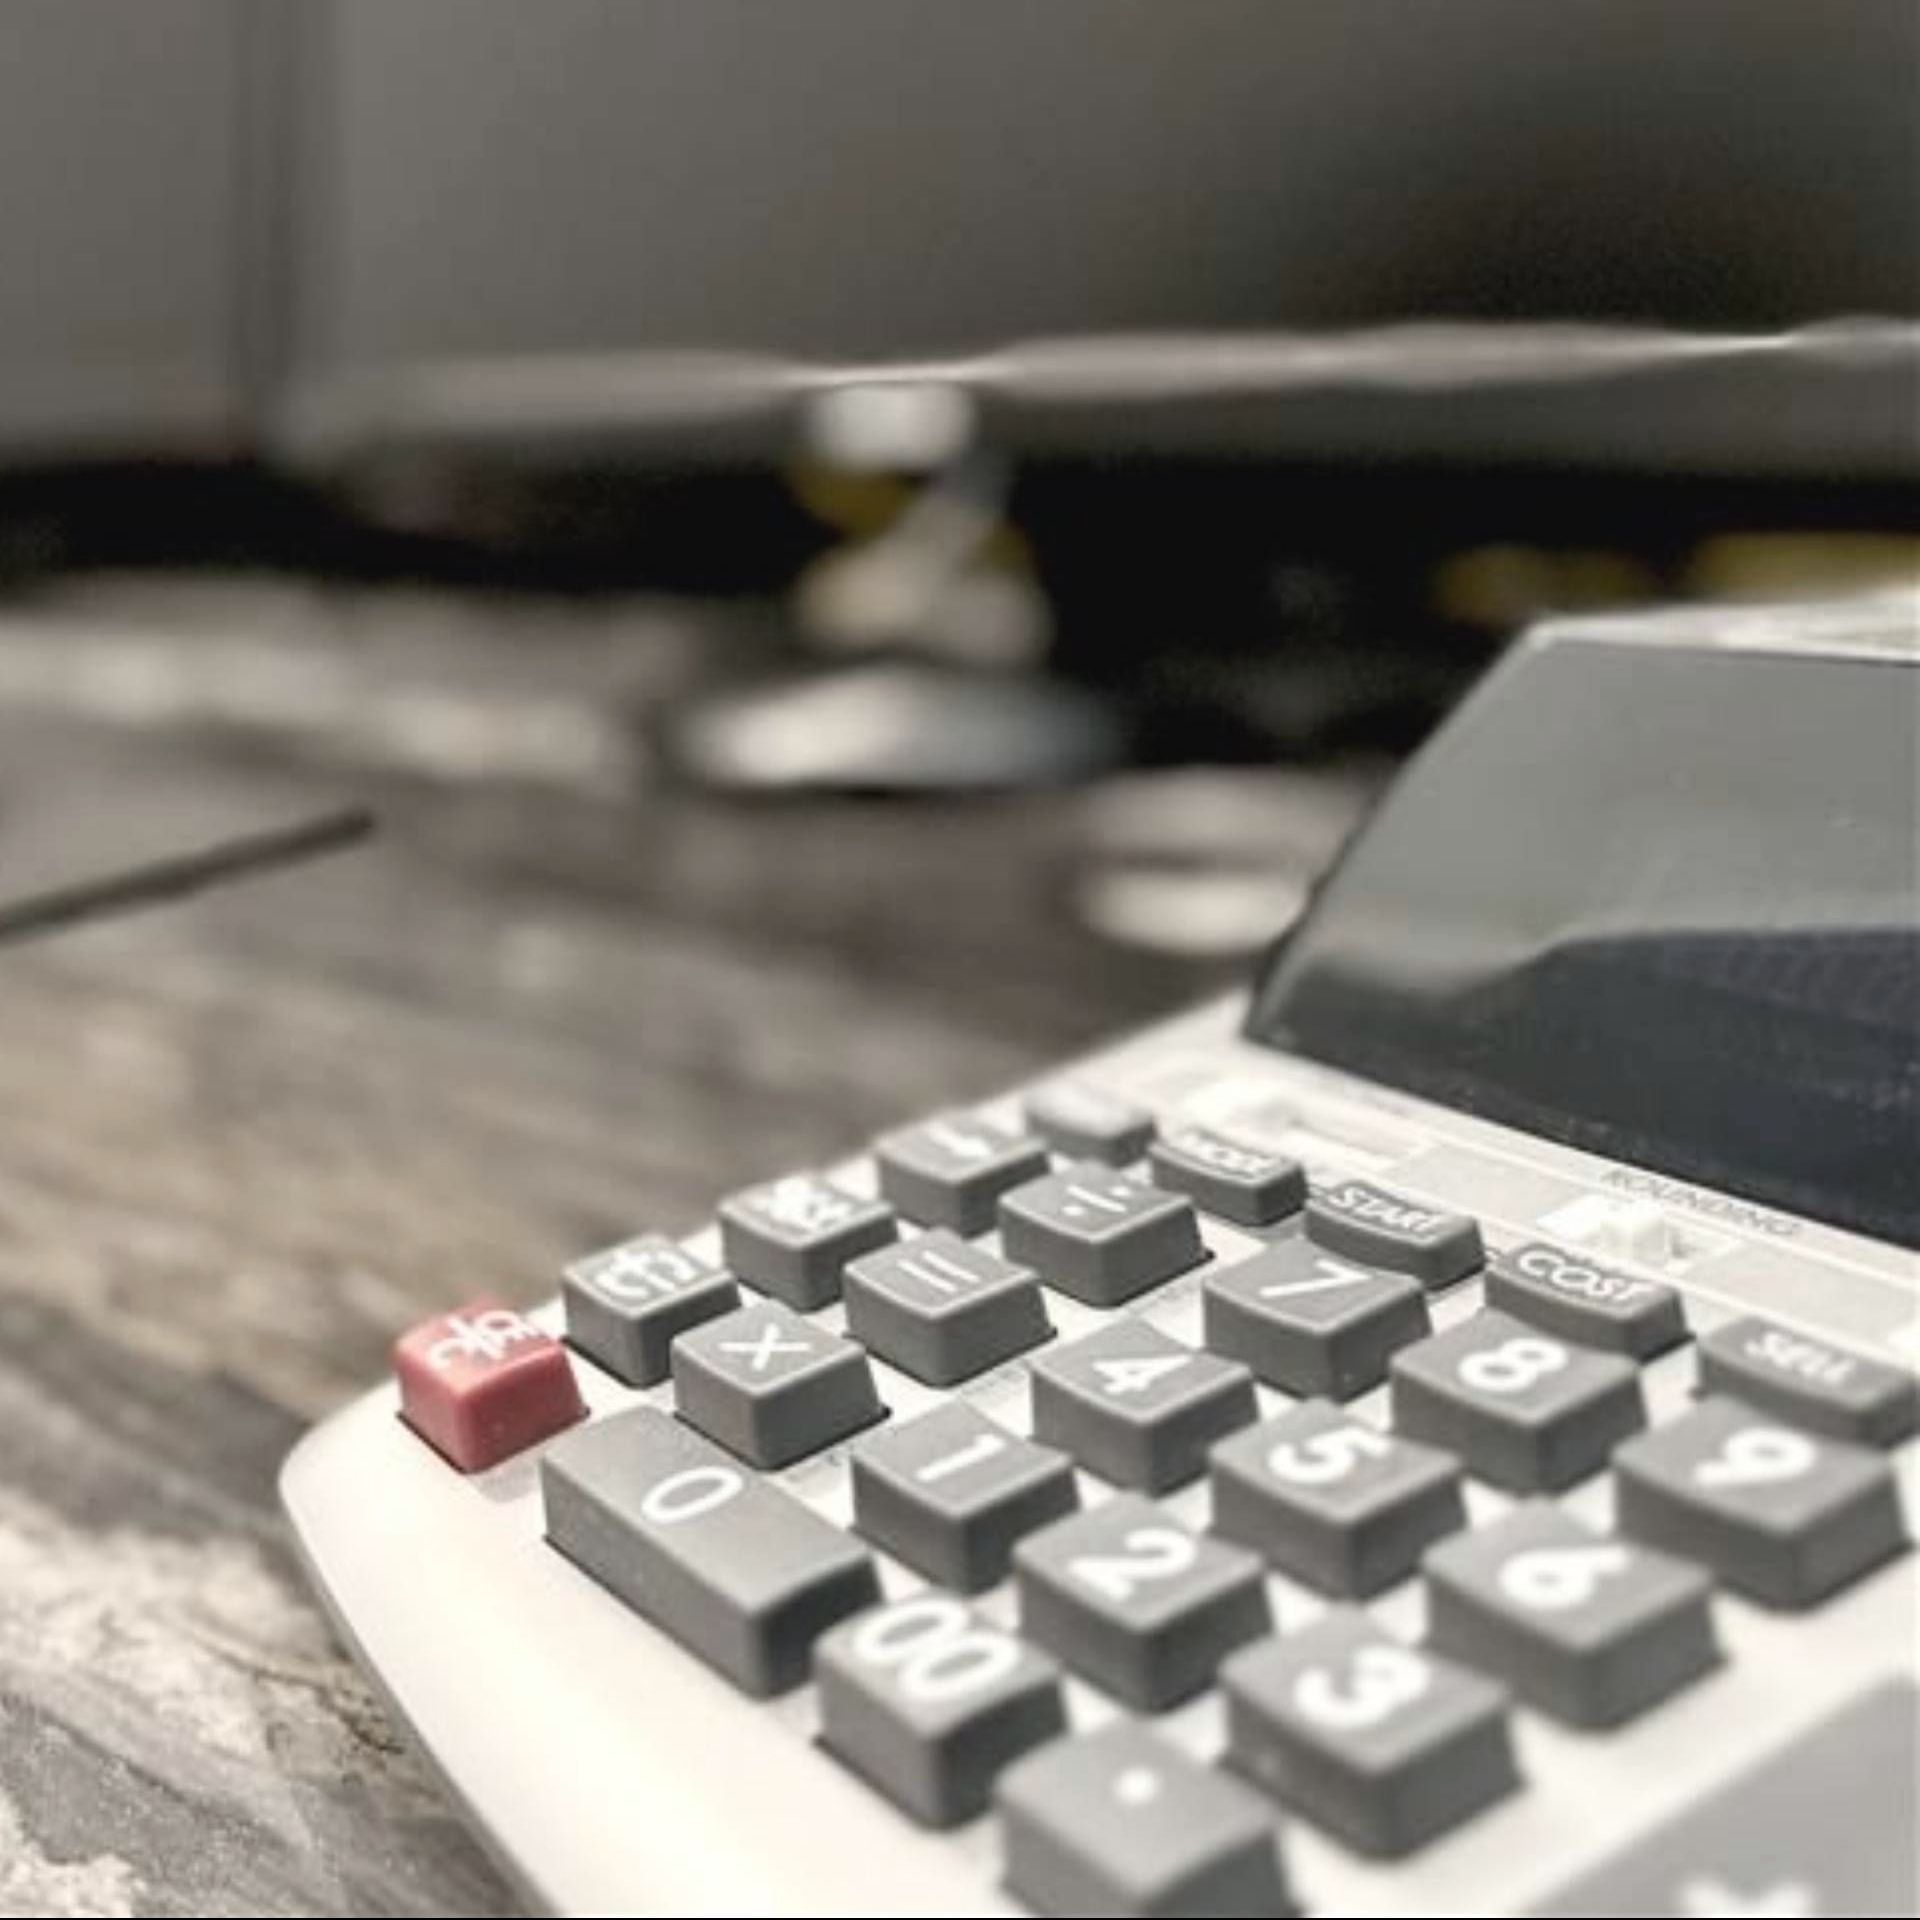 A close up of a calculator on a table